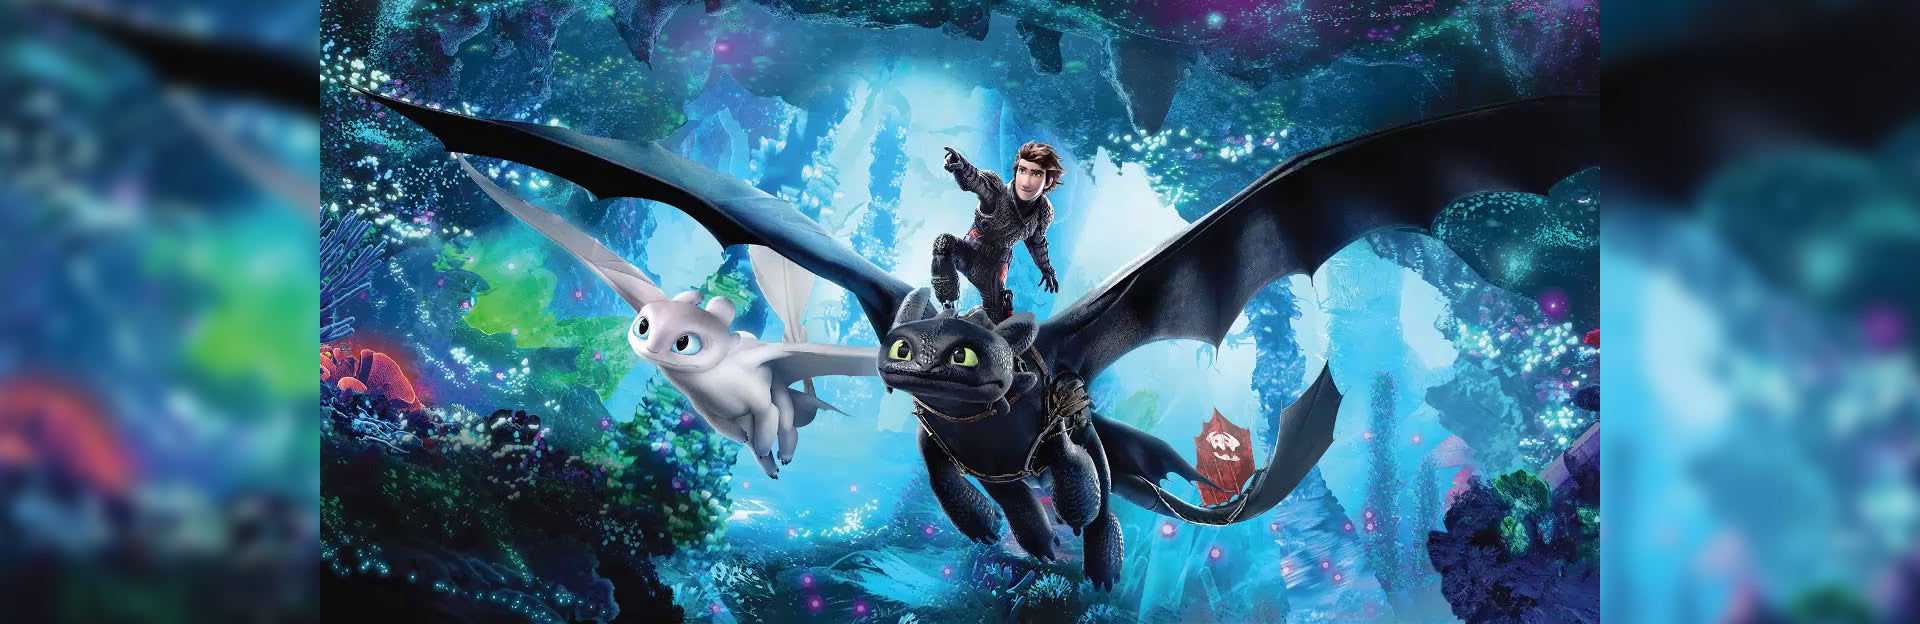 darshan gautam add how to train your dragon pictures photo